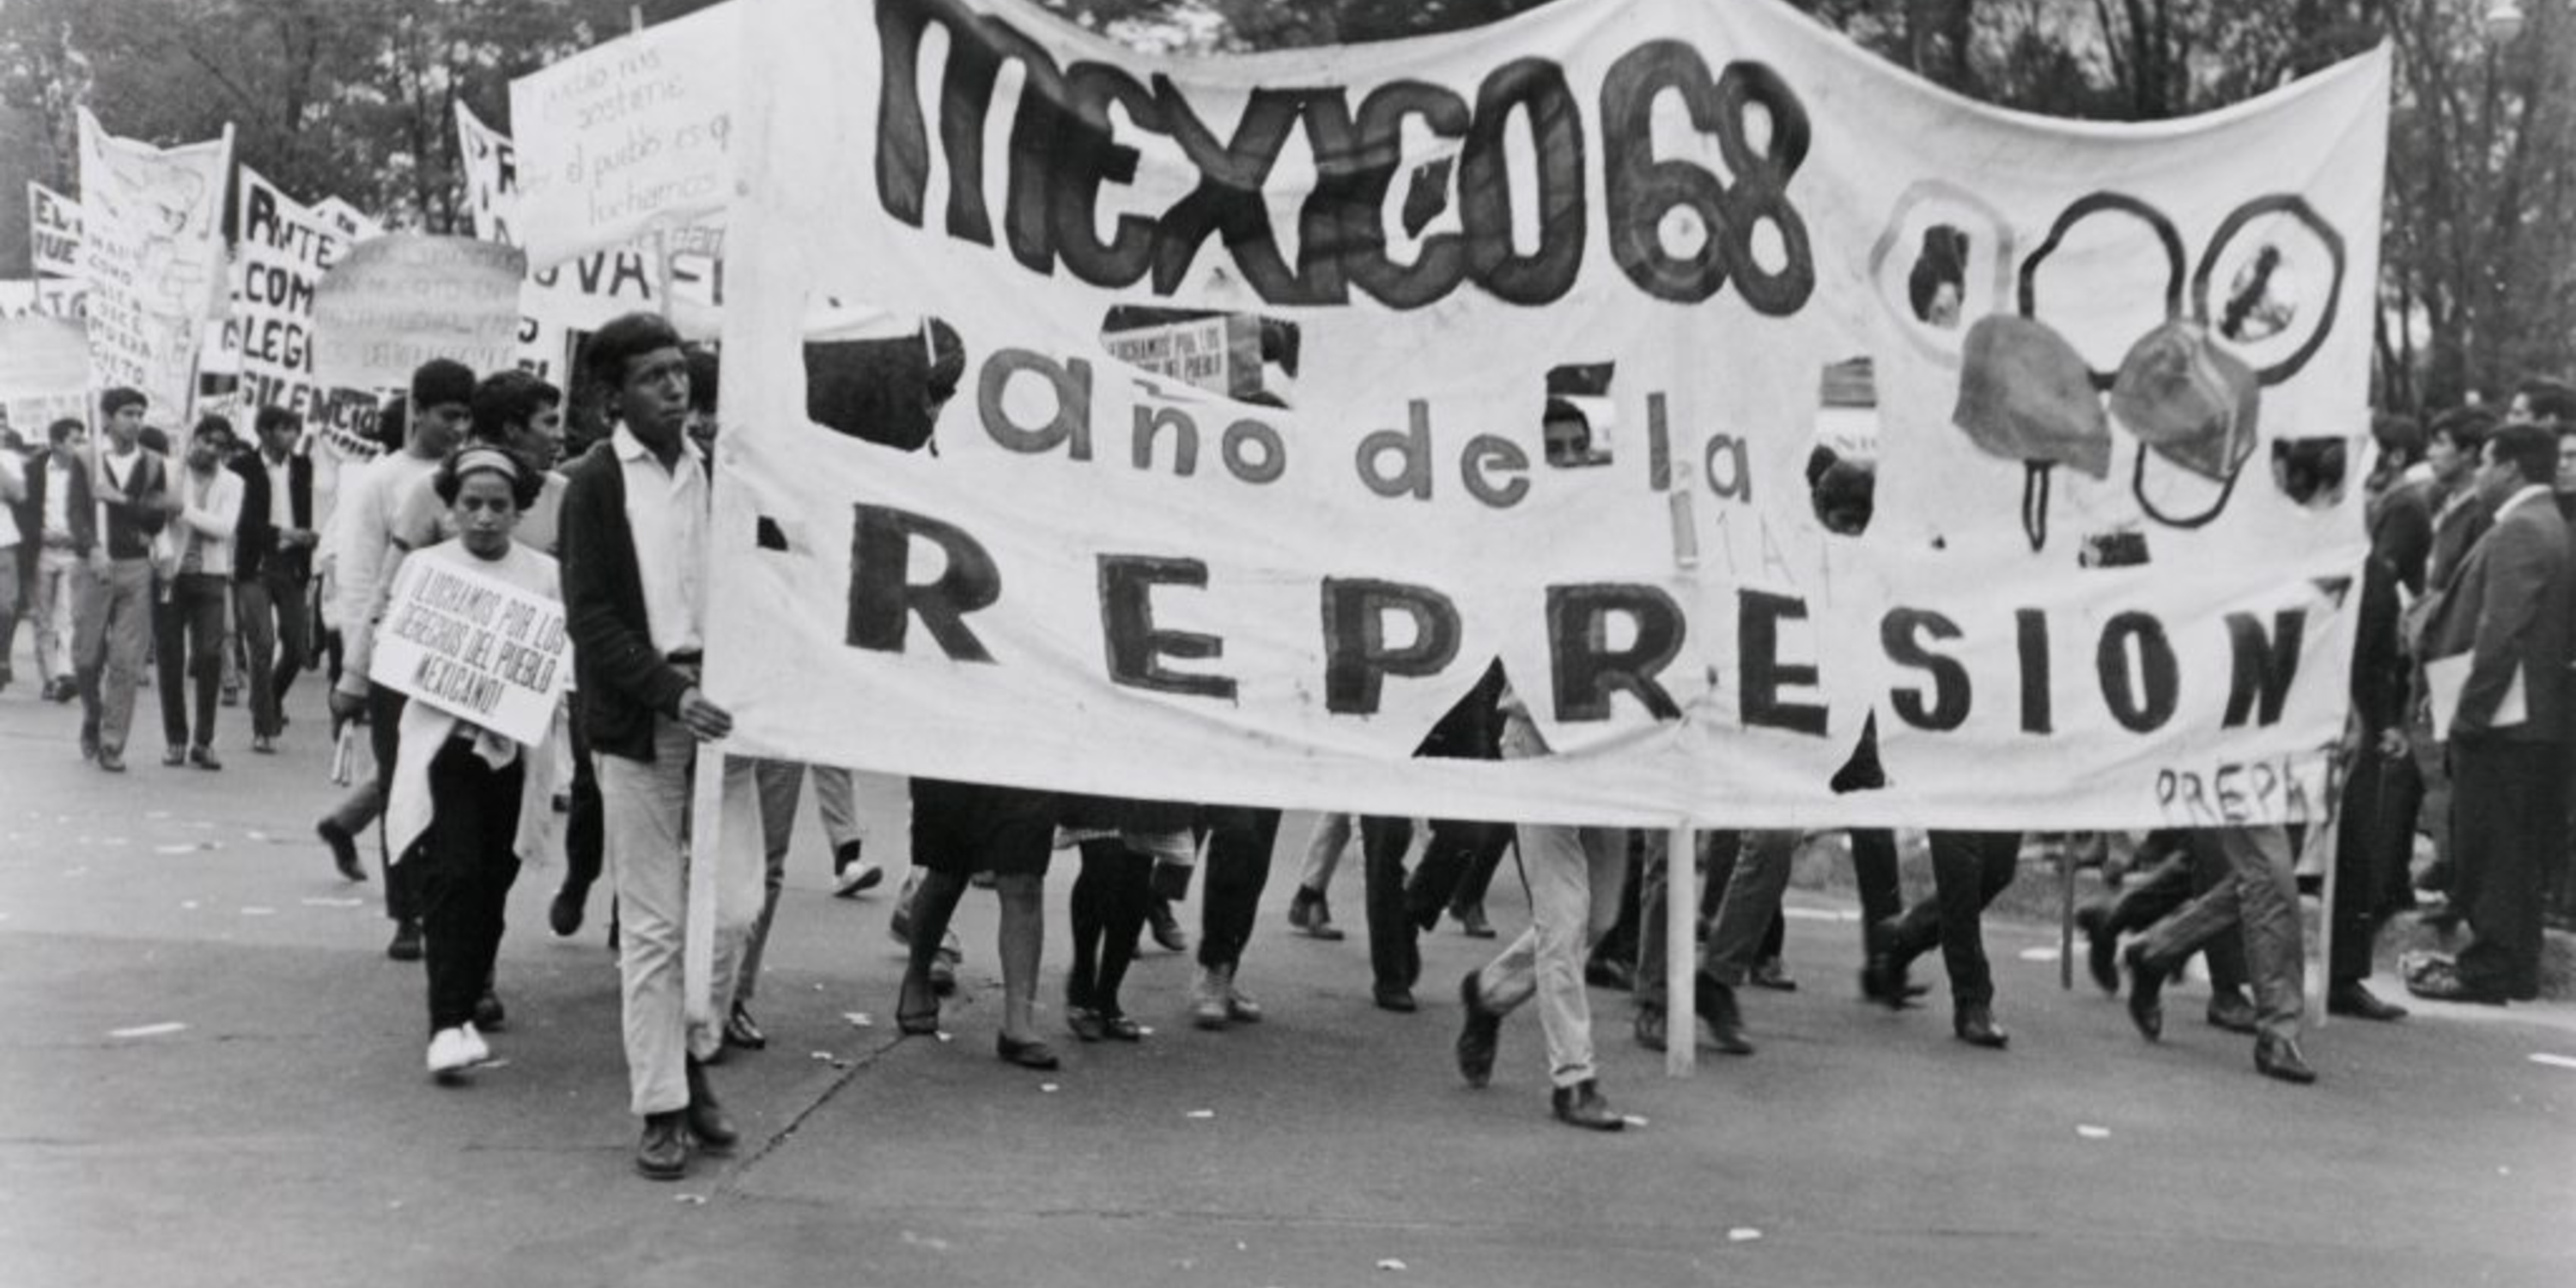 Students in Mexico protest the PRI in 1968 with a sign that reads "Mexico '68: The Year of Repression."